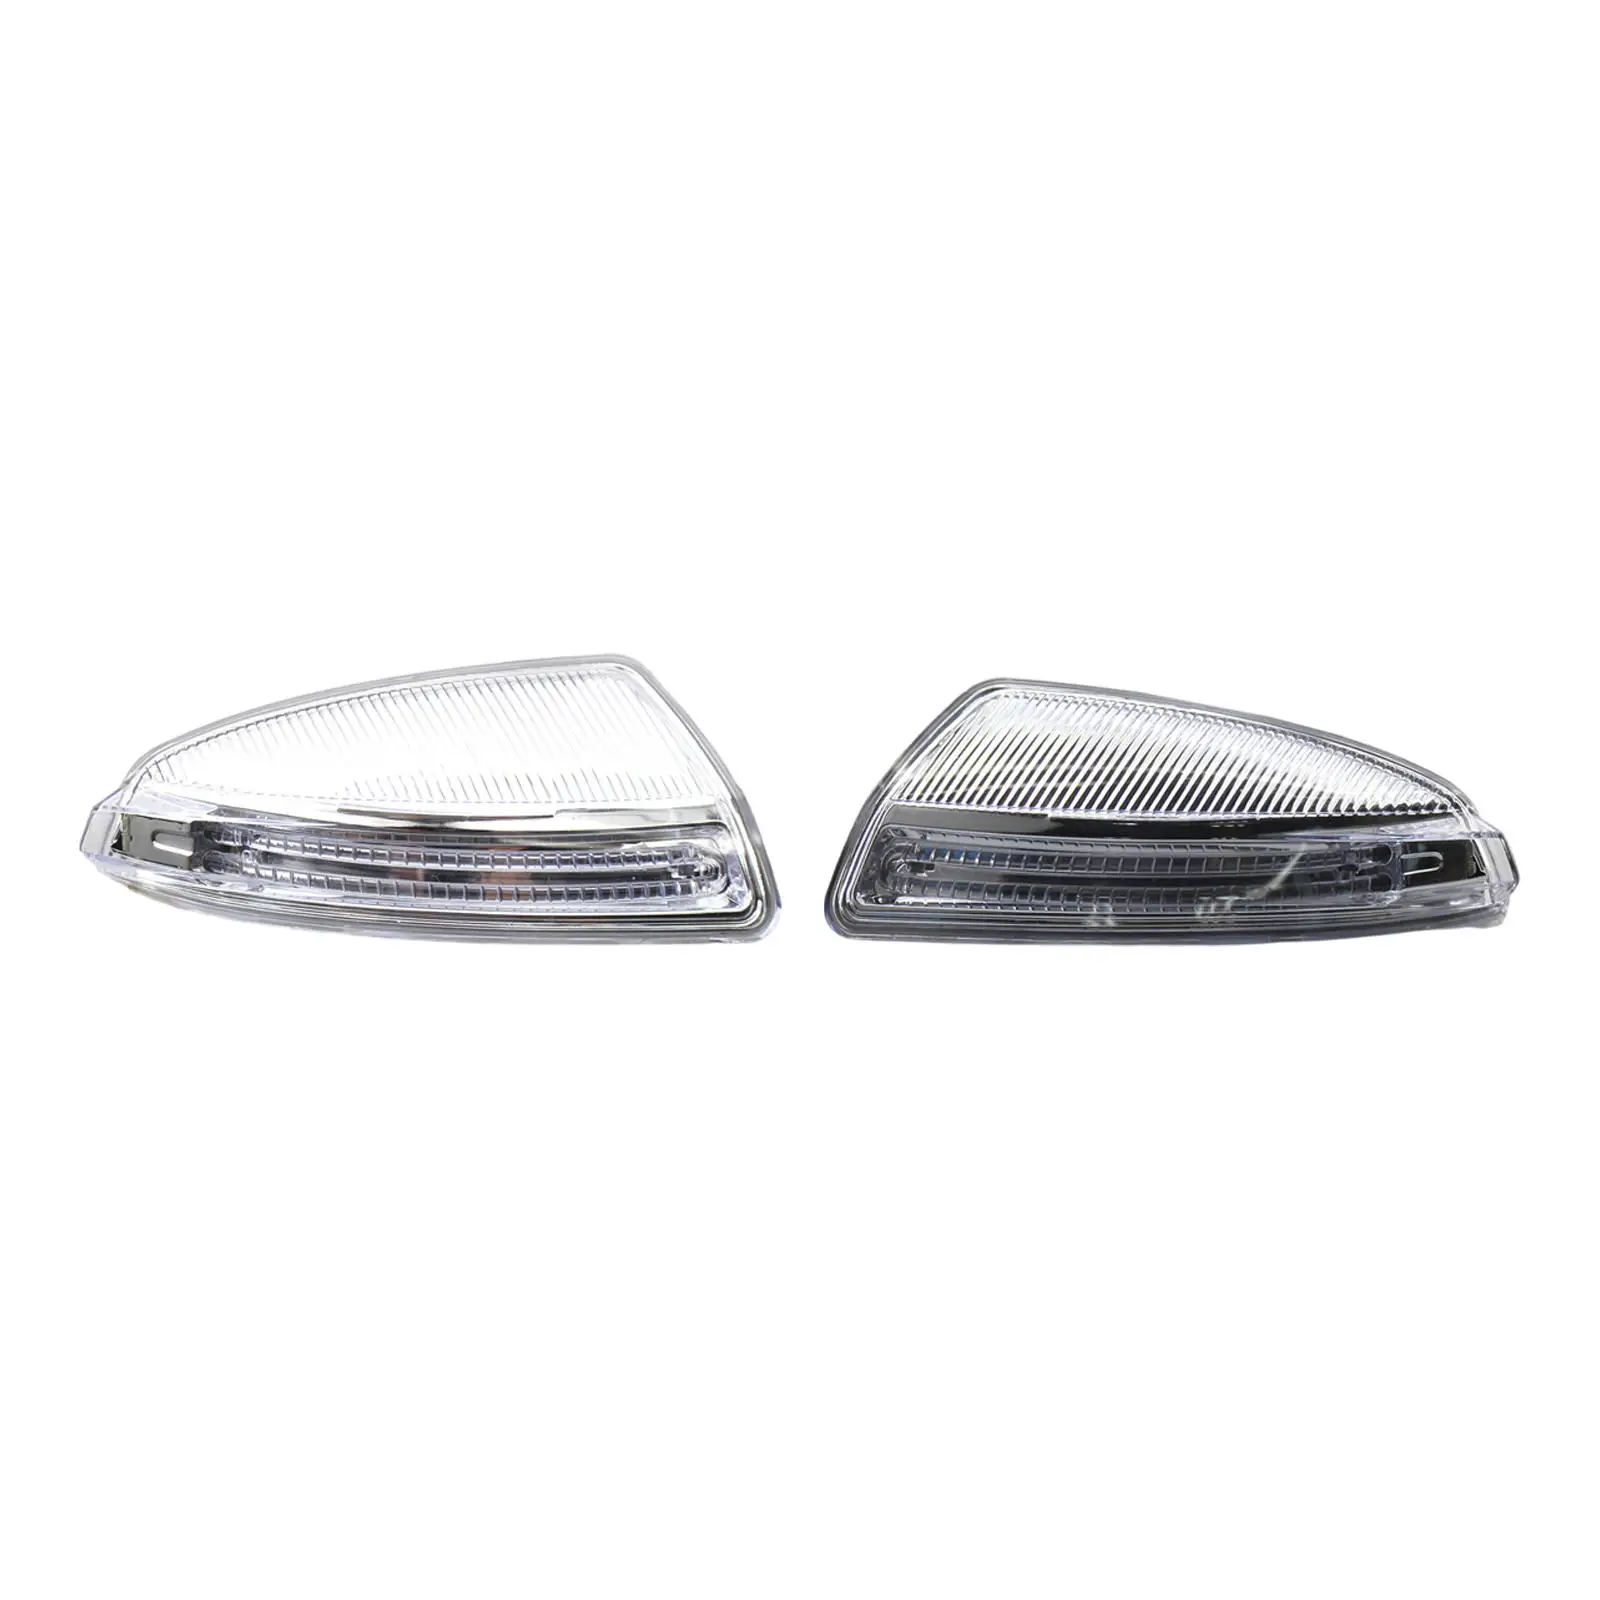 Mirror Turn Signal Light A2048200721 Acrylic Indicator Fit for Mercedes W204 2008-2011